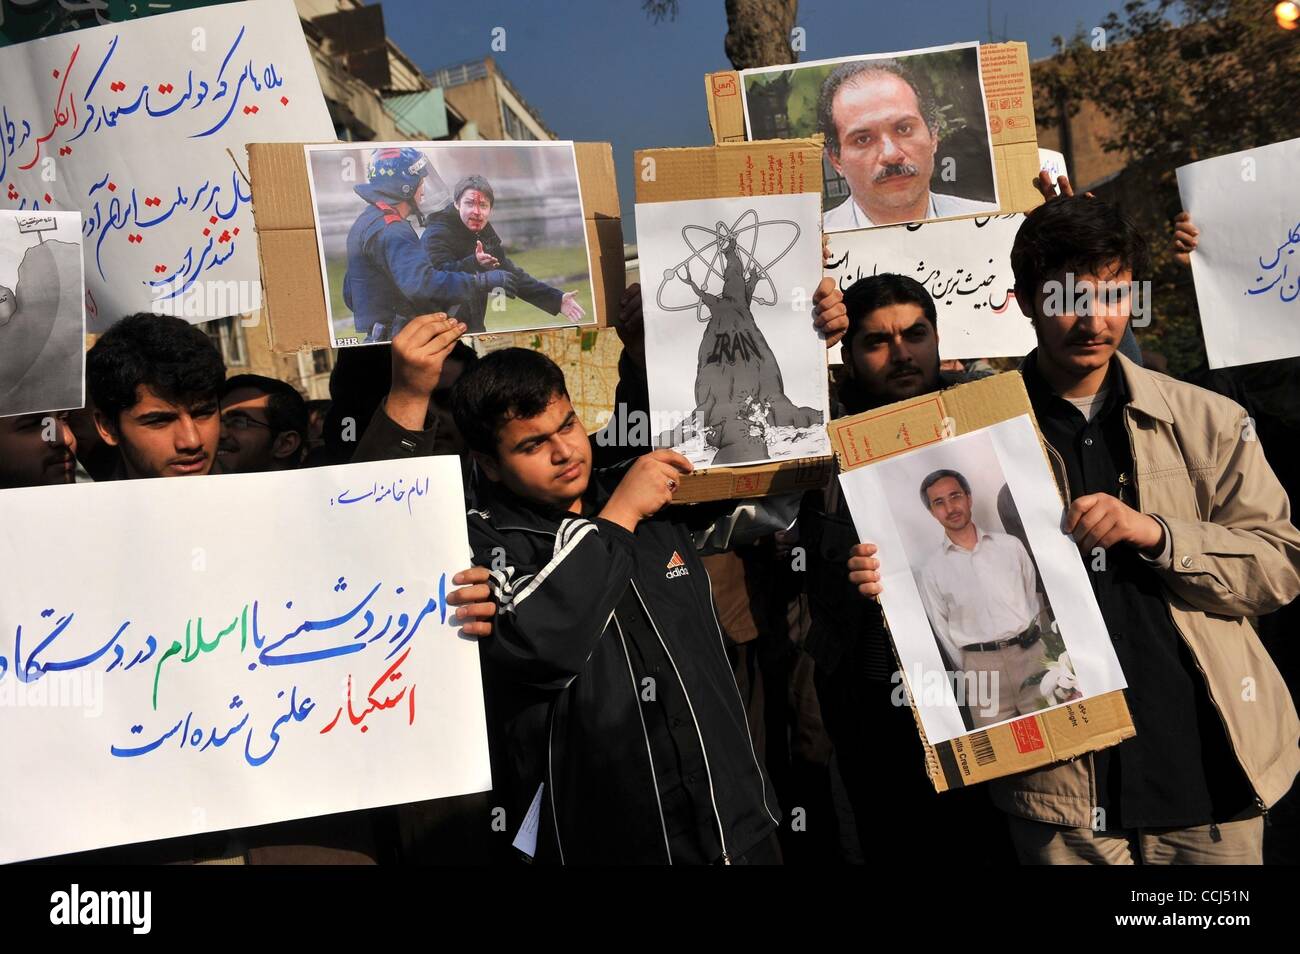 Dec 12, 2010 - Tehran, Iran - Iranian students gathered in front of the British Embassy in Tehran to condemn the assassination of Iranian nuclear scientist Majid Shahriari, who was killed Nov 29 by a car bomb.The protesters accused Britain and U.S government for his assassination, and condemned West Stock Photo